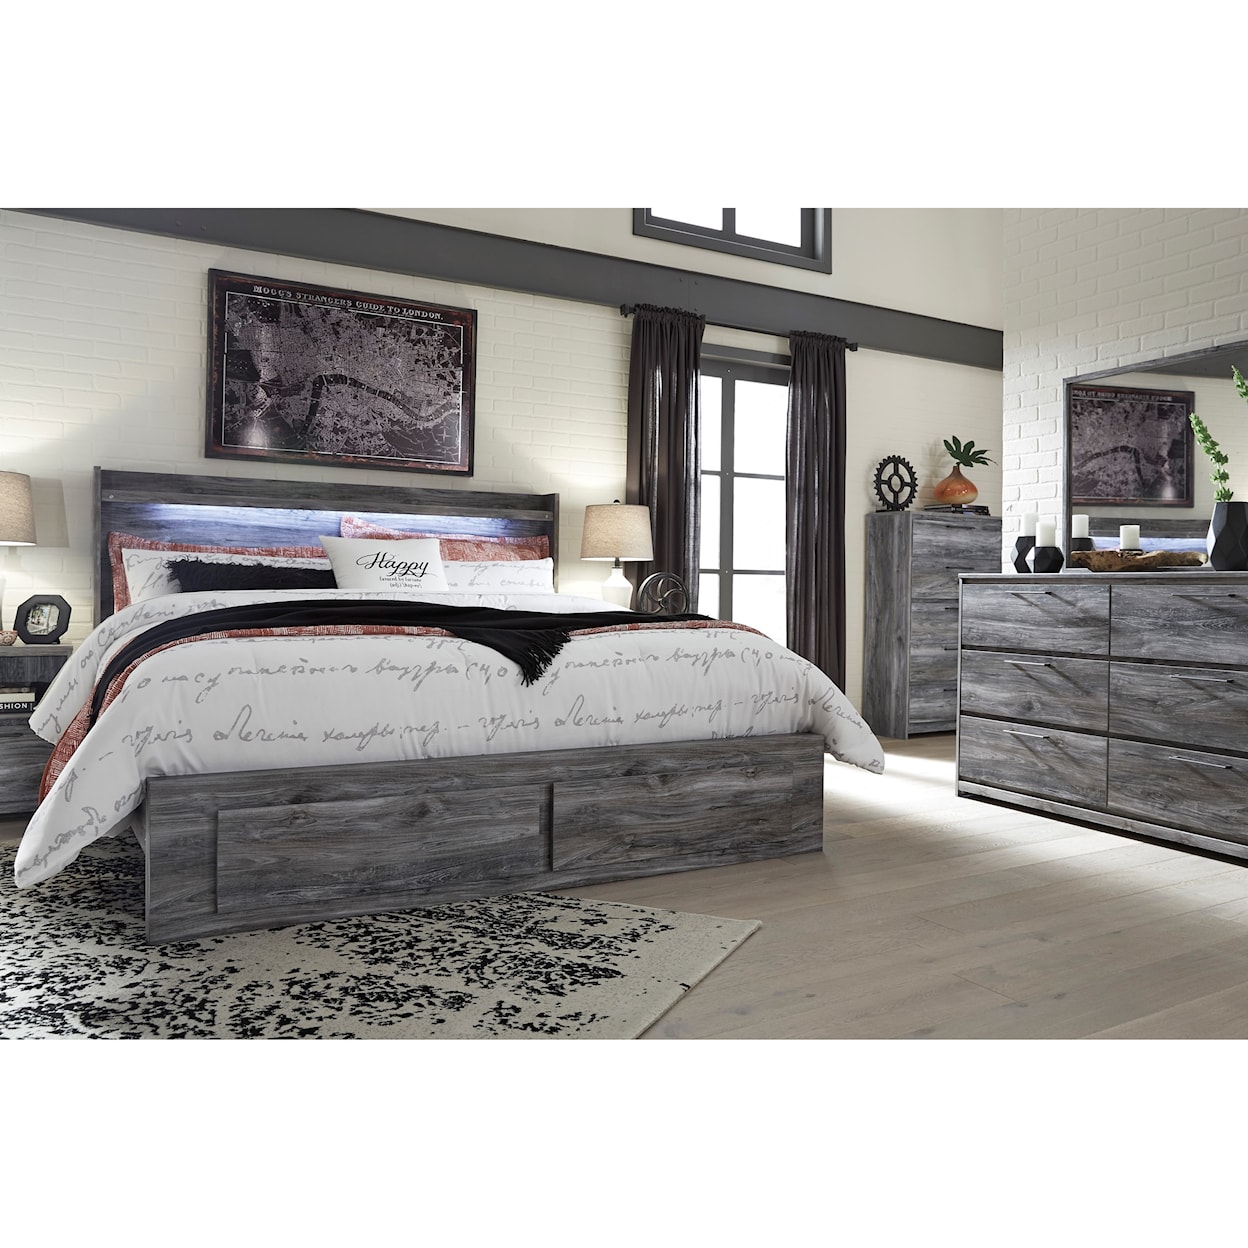 Ashley Furniture Signature Design Baystorm King Panel Bed with Storage Footboard